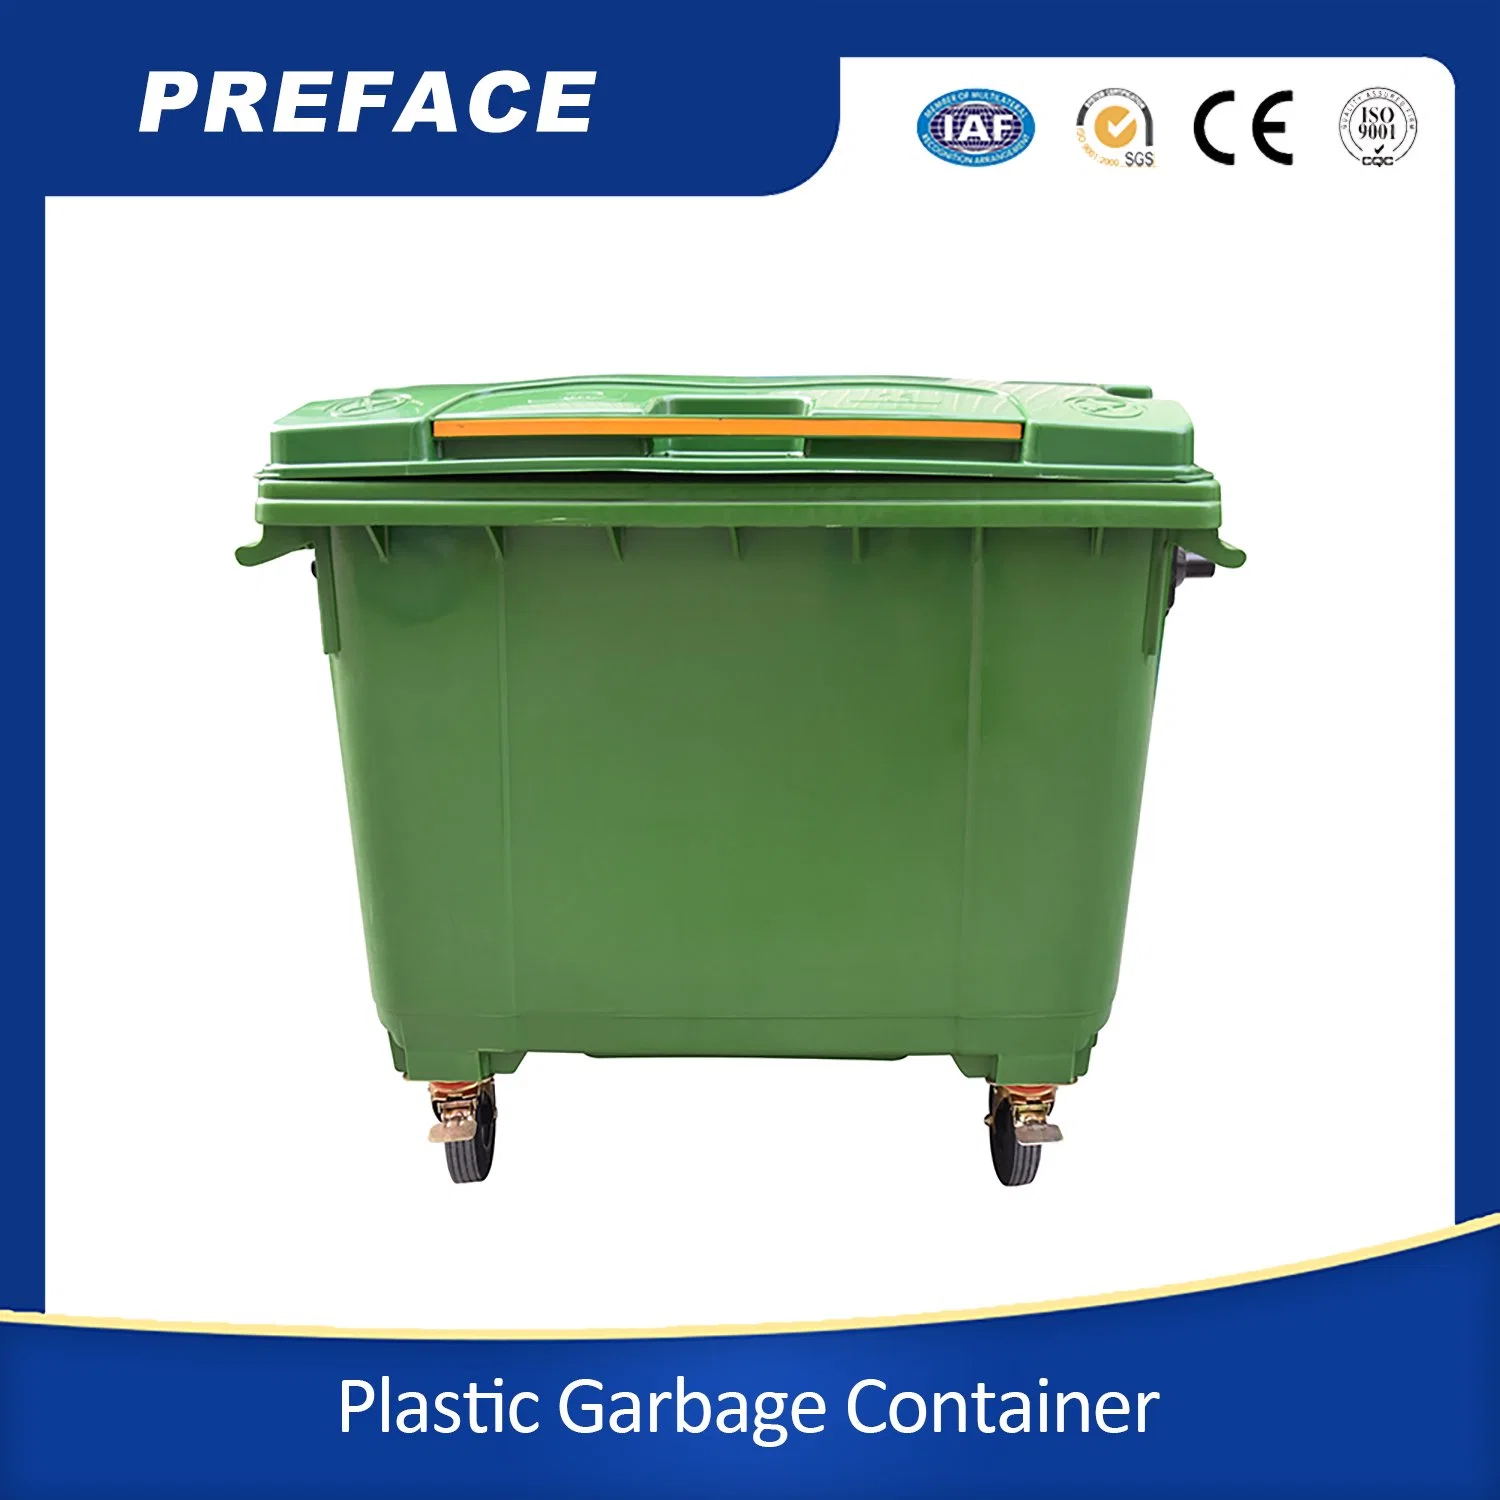 660 Liter Plastic Garbage Bin, Big Waste Container on Sale and Big Size Plastic Dustbin